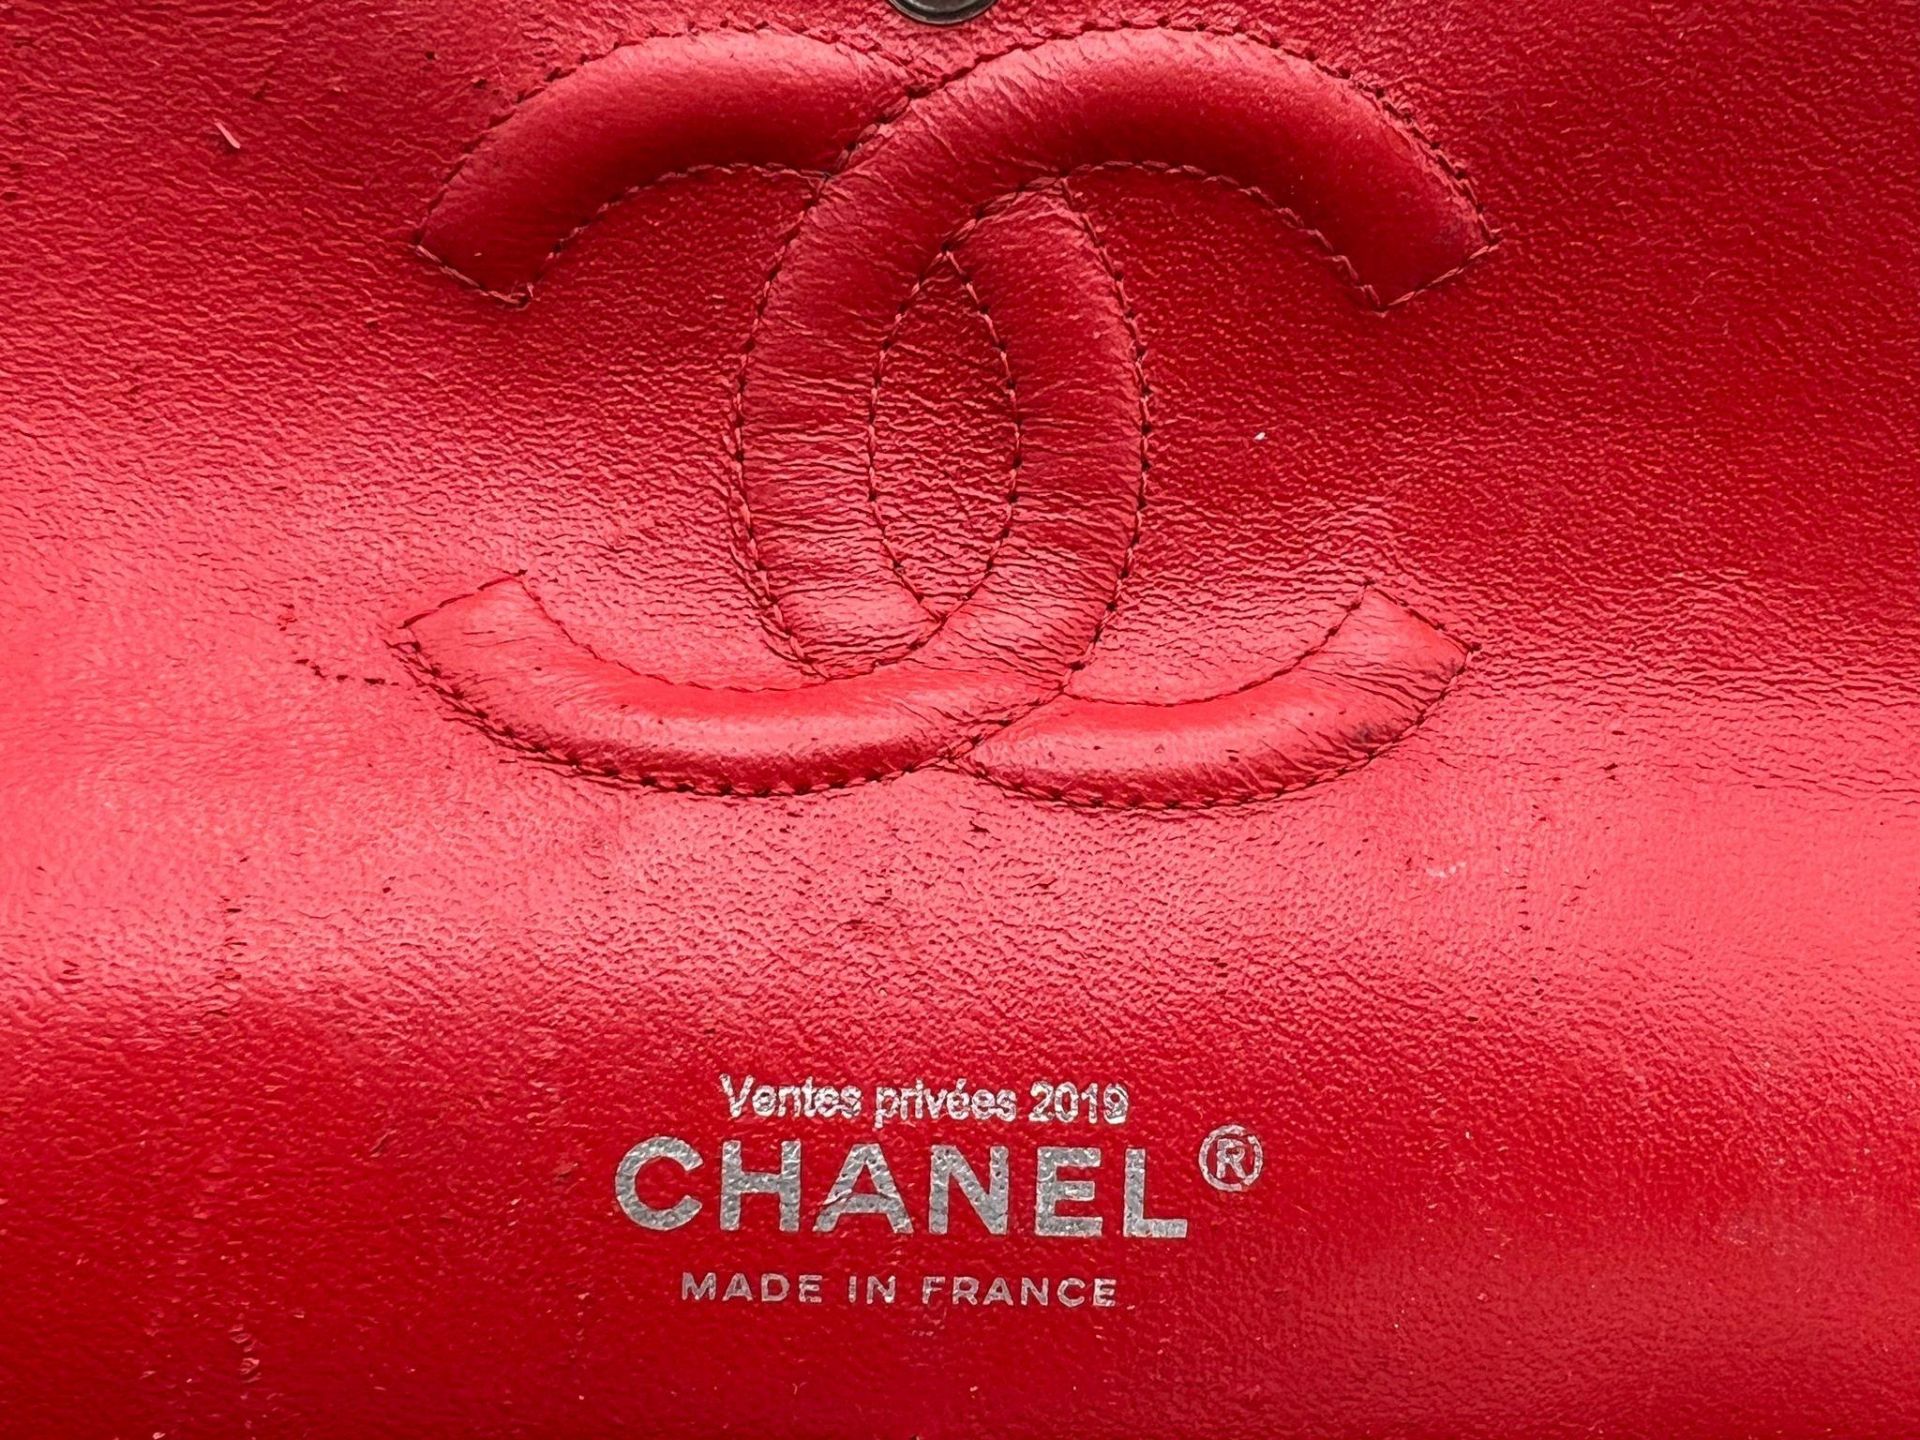 A Chanel Patent Leather Flap Handbag. Bright red patent leather quilted exterior. Classic Chanel - Bild 5 aus 7